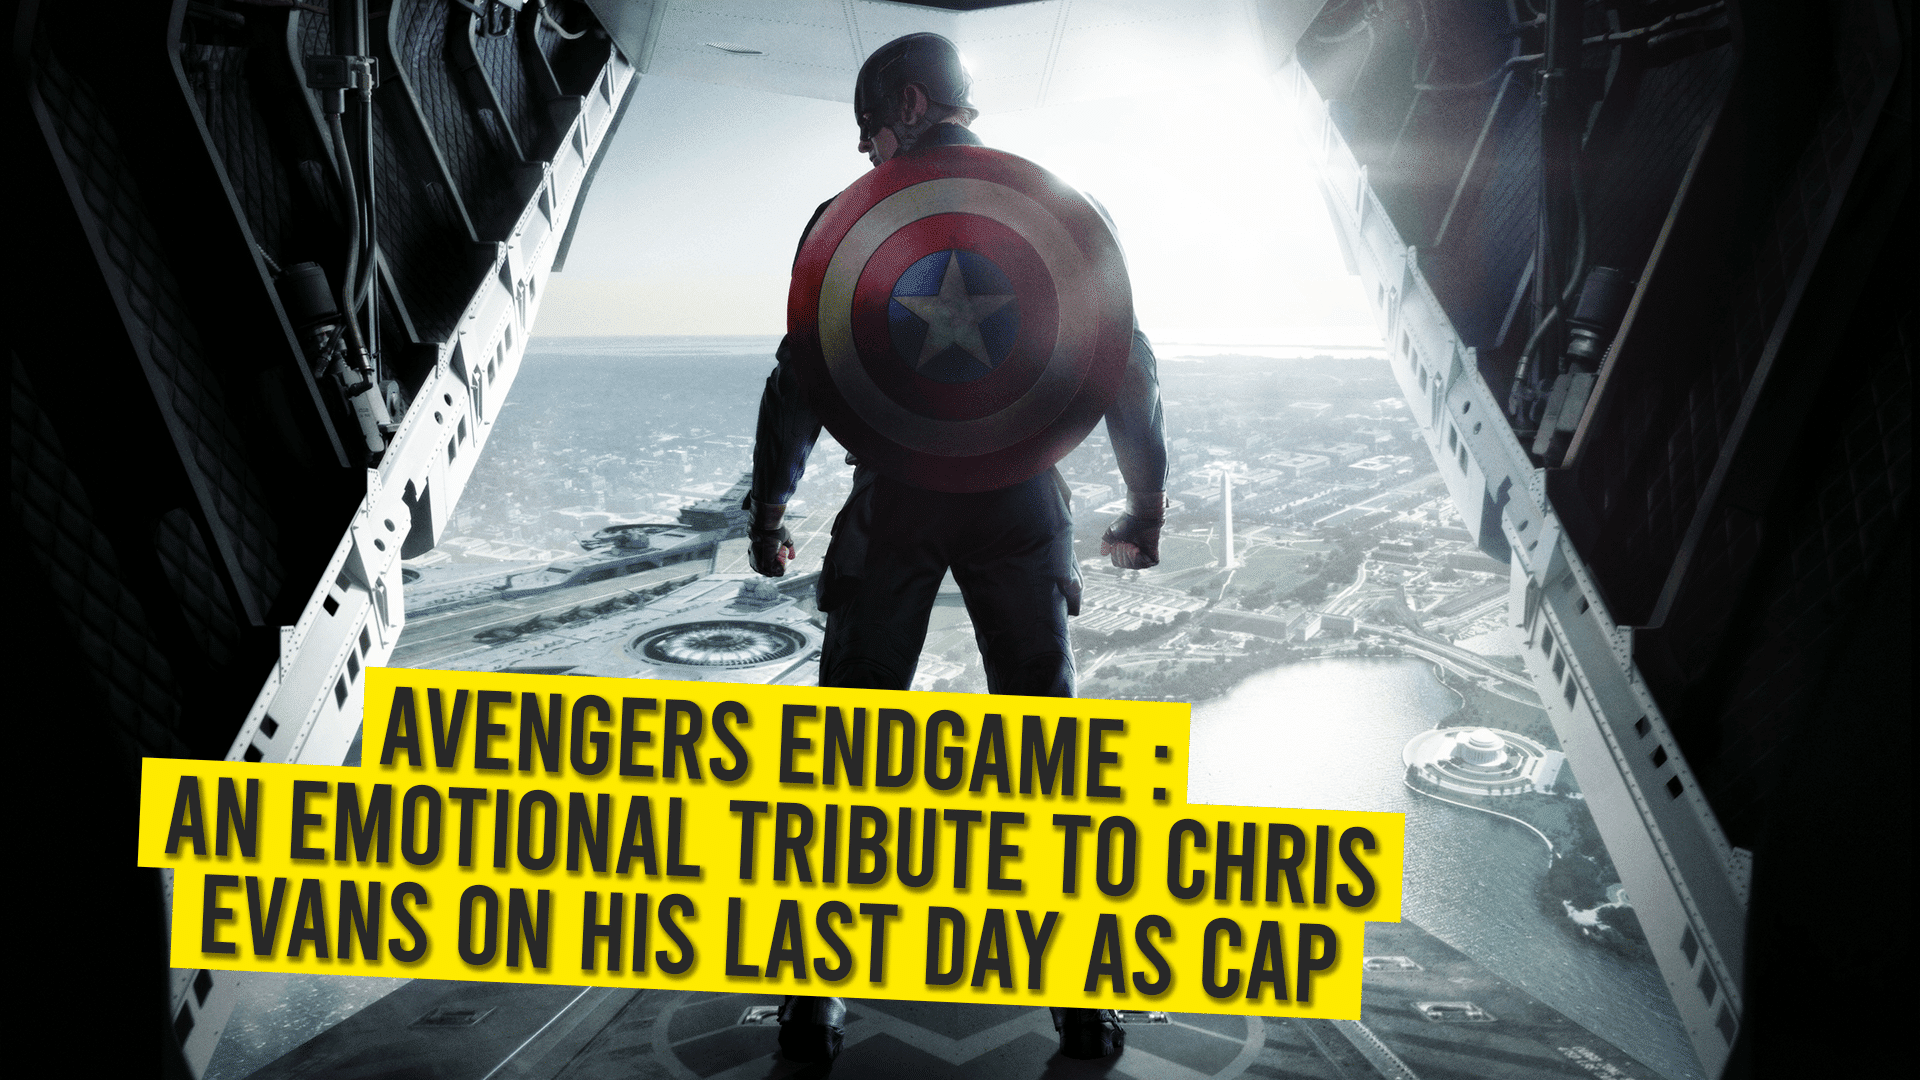 Avengers Endgame : An Emotional Tribute to Chris Evans on his Last Day as Cap